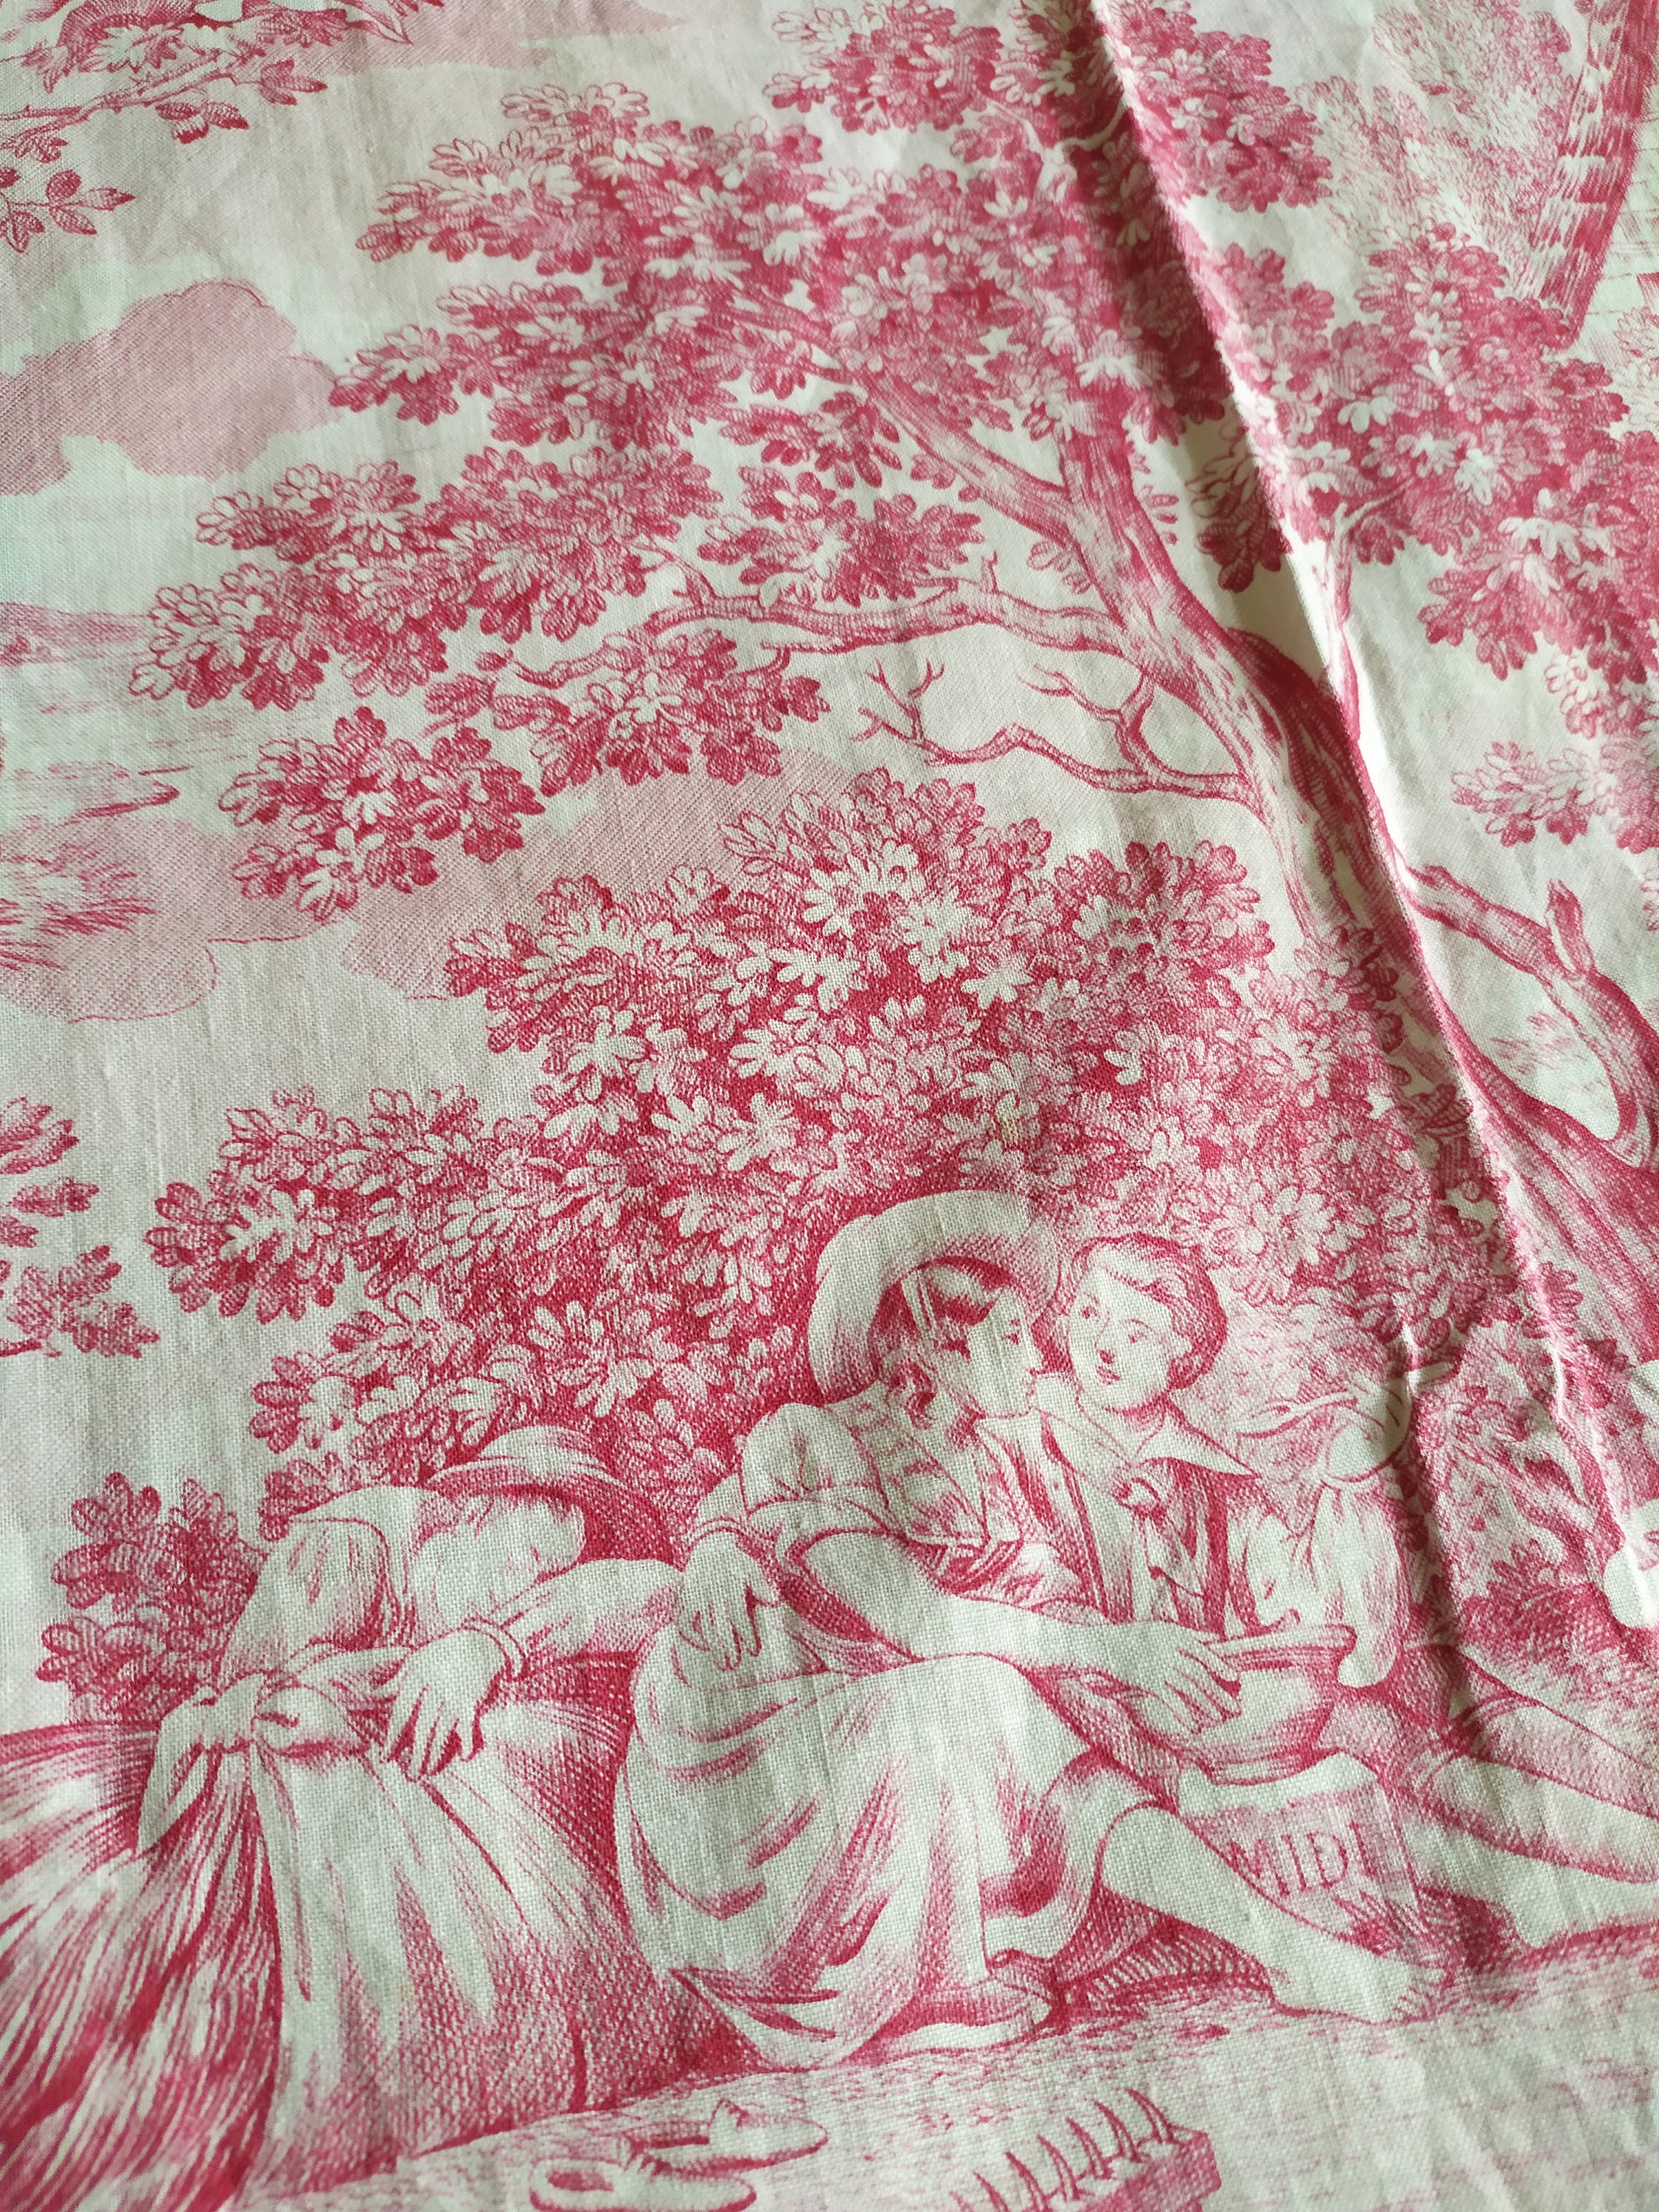 Toile de Jouy: what is it and a brief history - Homes and Antiques